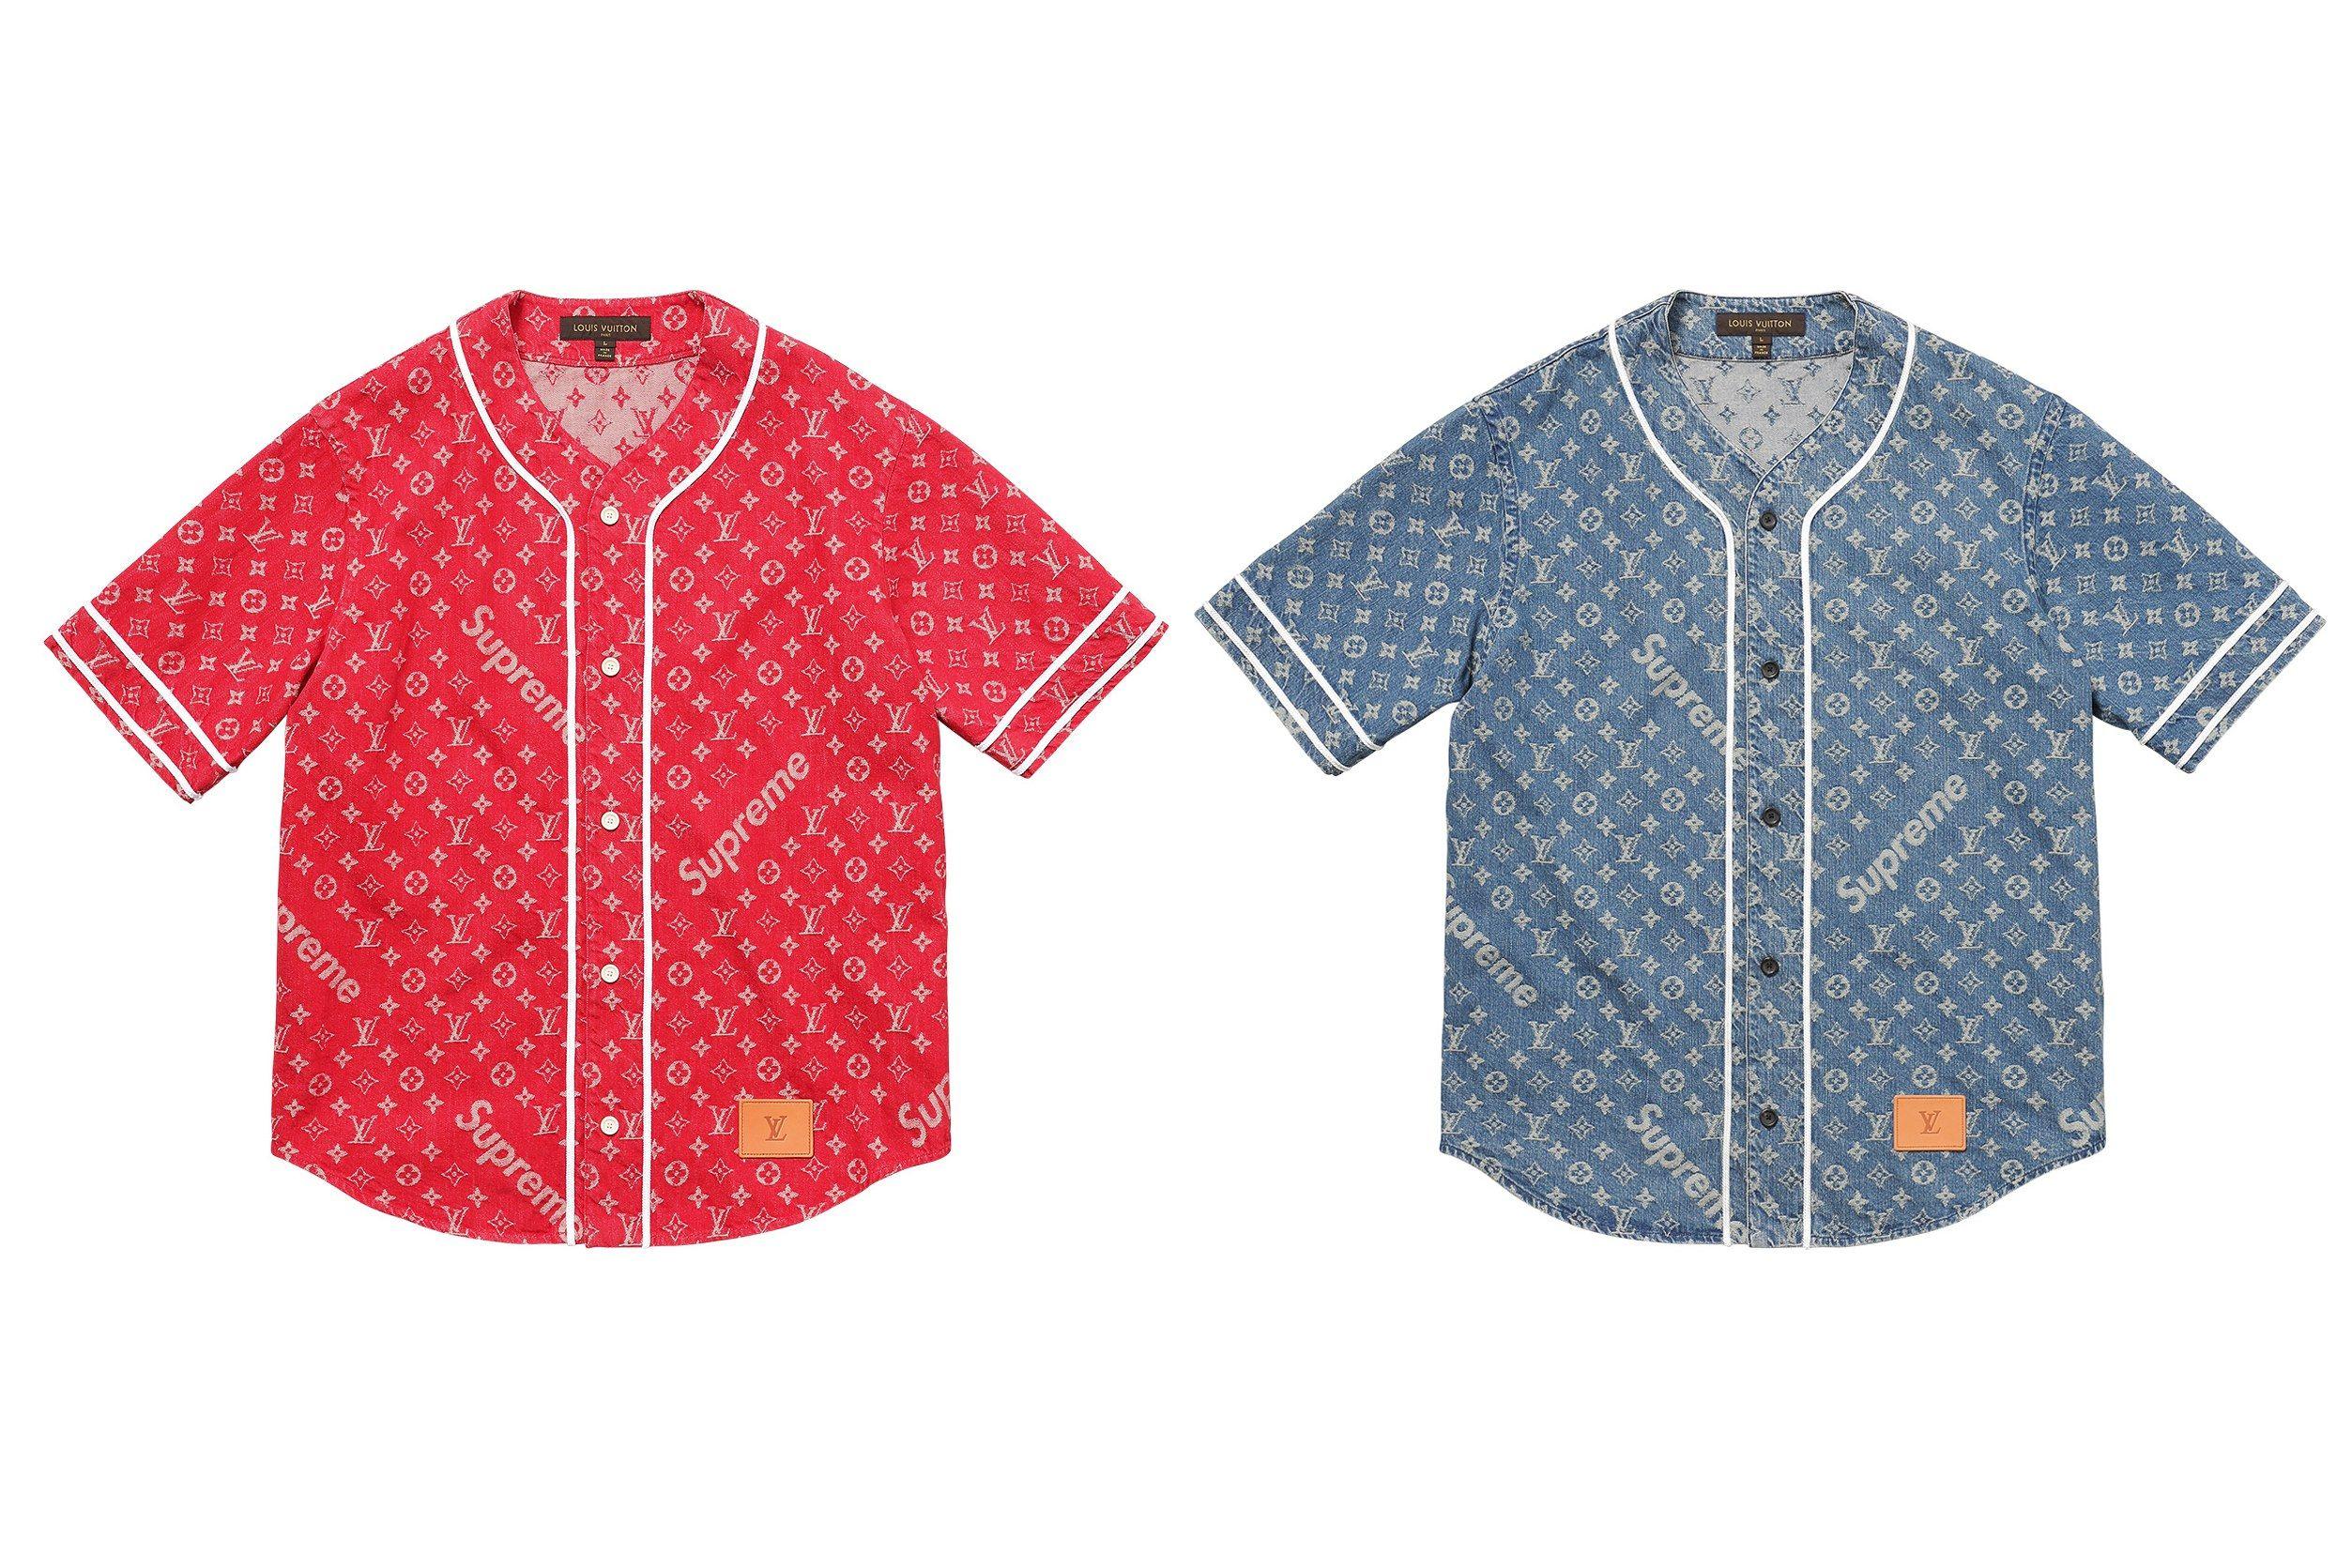 LV X Supreme Collab Logo - Supreme x Louis Vuitton: See Every Piece from the Game-changing ...